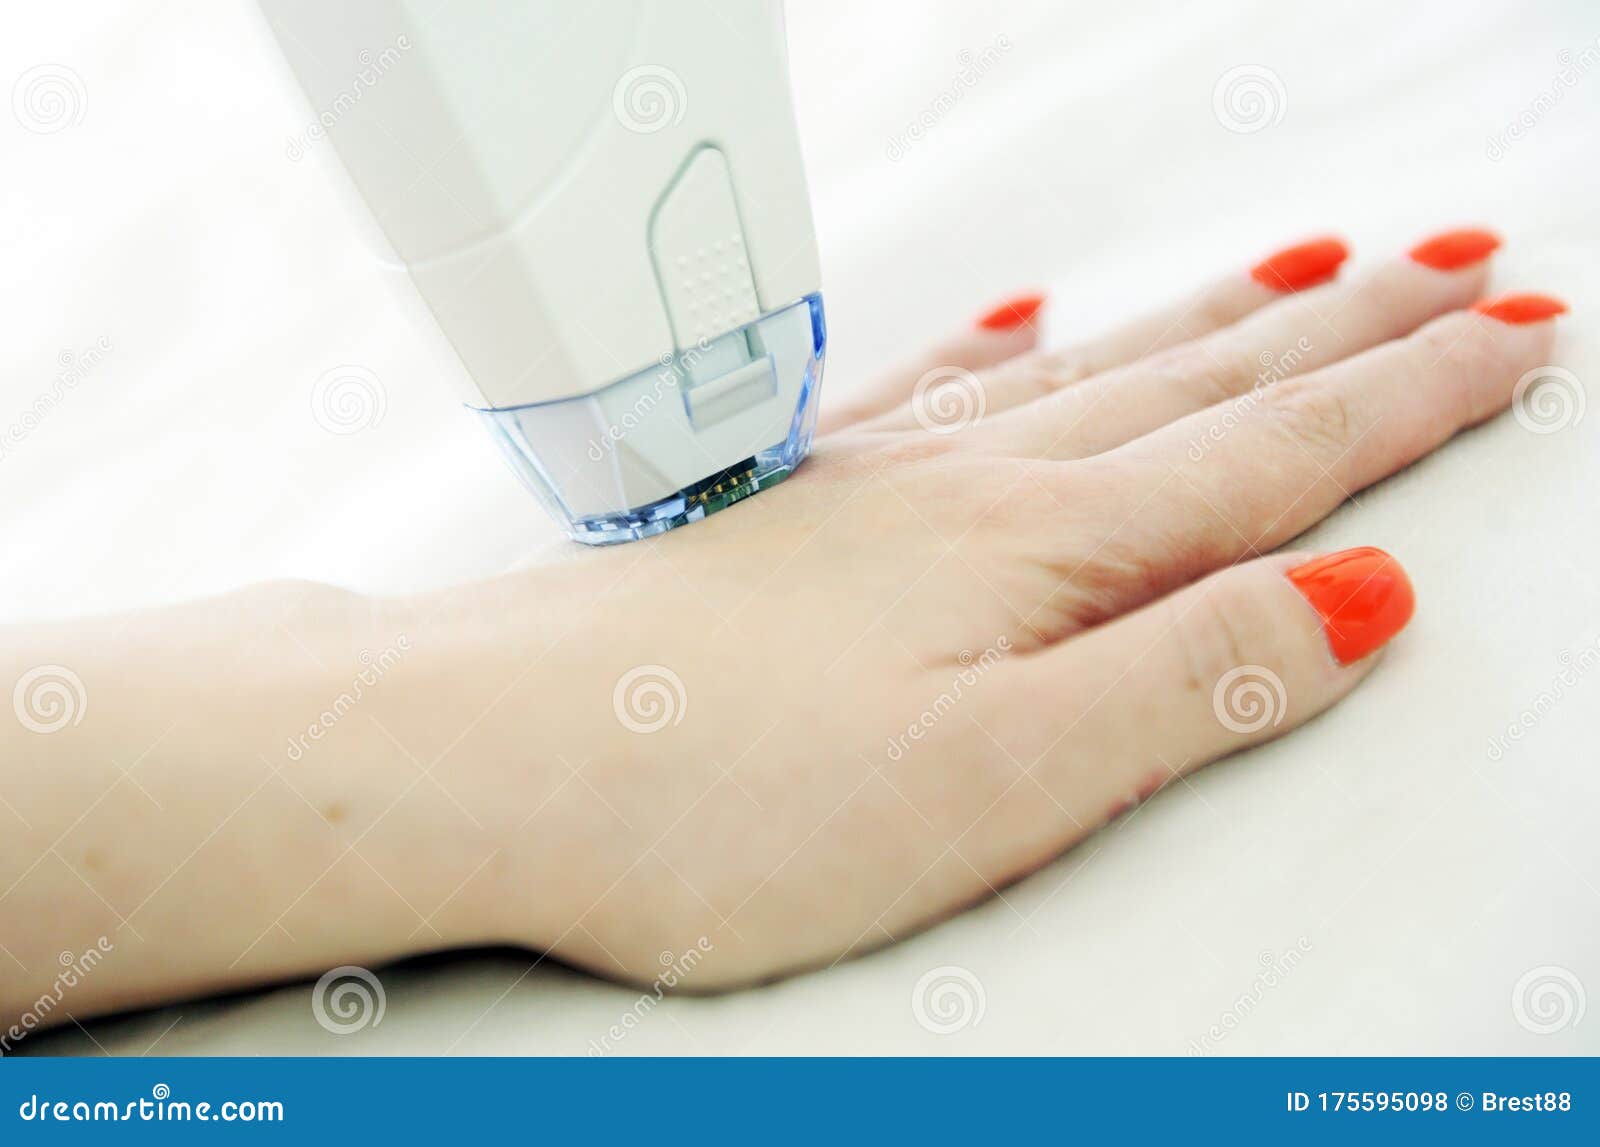 woman receives laser and ultrasound treatment of face and body and hands in a medical sanatorium, skin rejuvenation concept